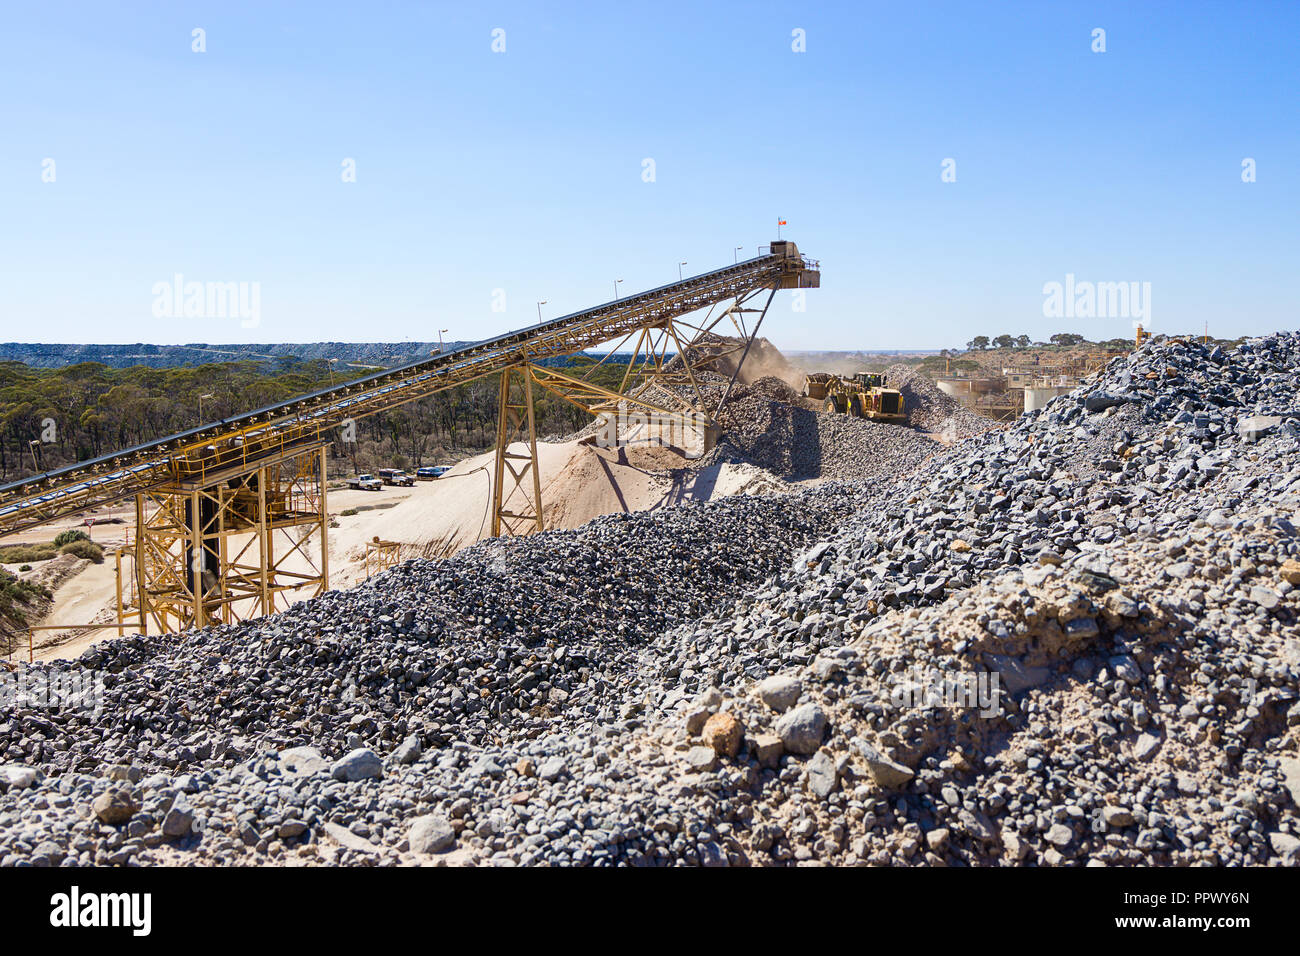 Crushed ore stock pile and feeder at mine site processing plant Stock Photo